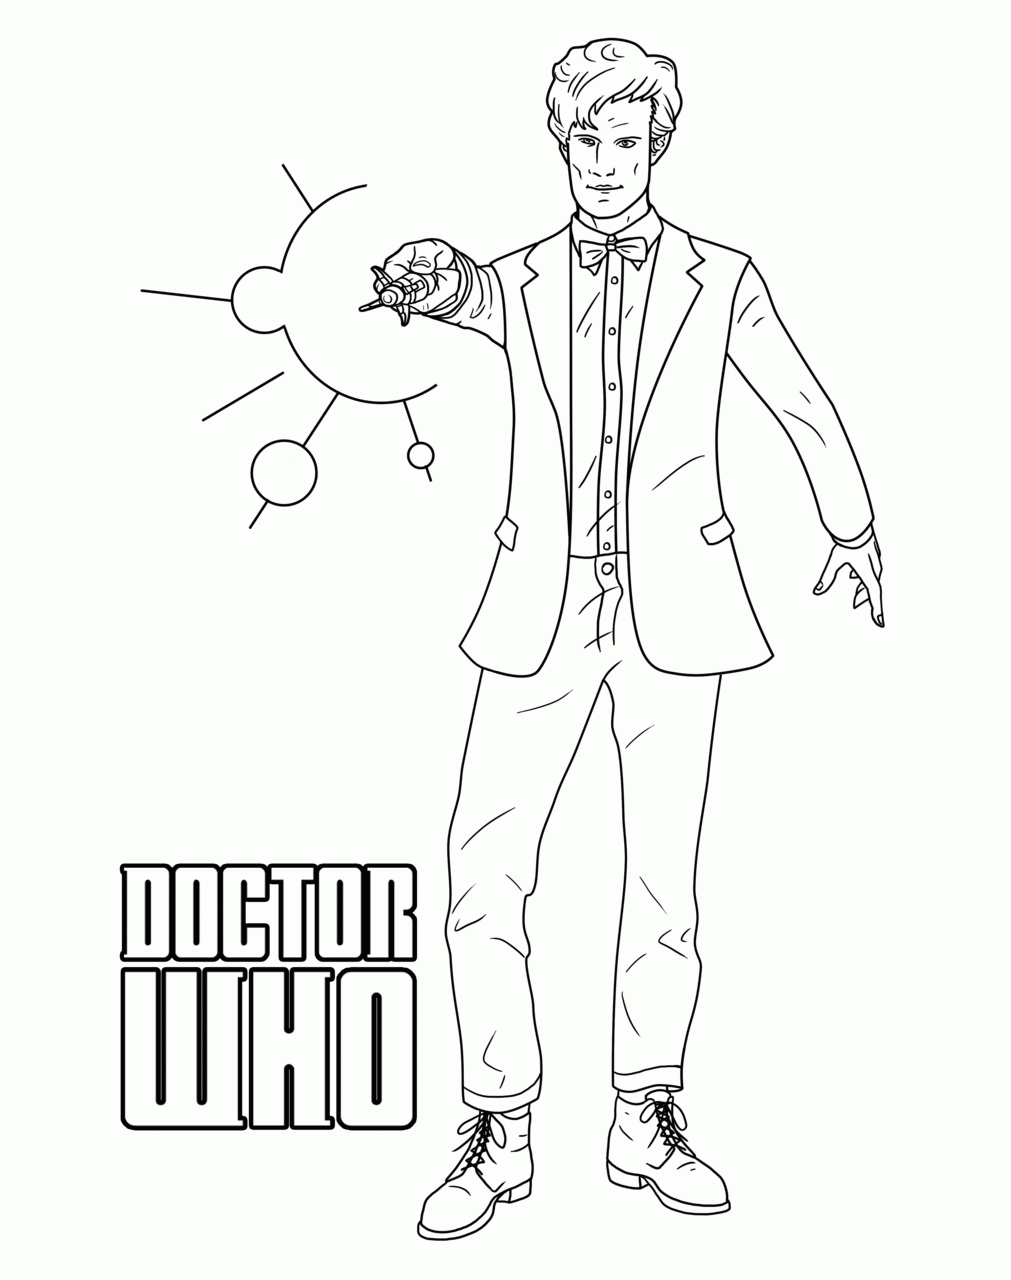 Doctor Who Coloring Pages - Coloring Home